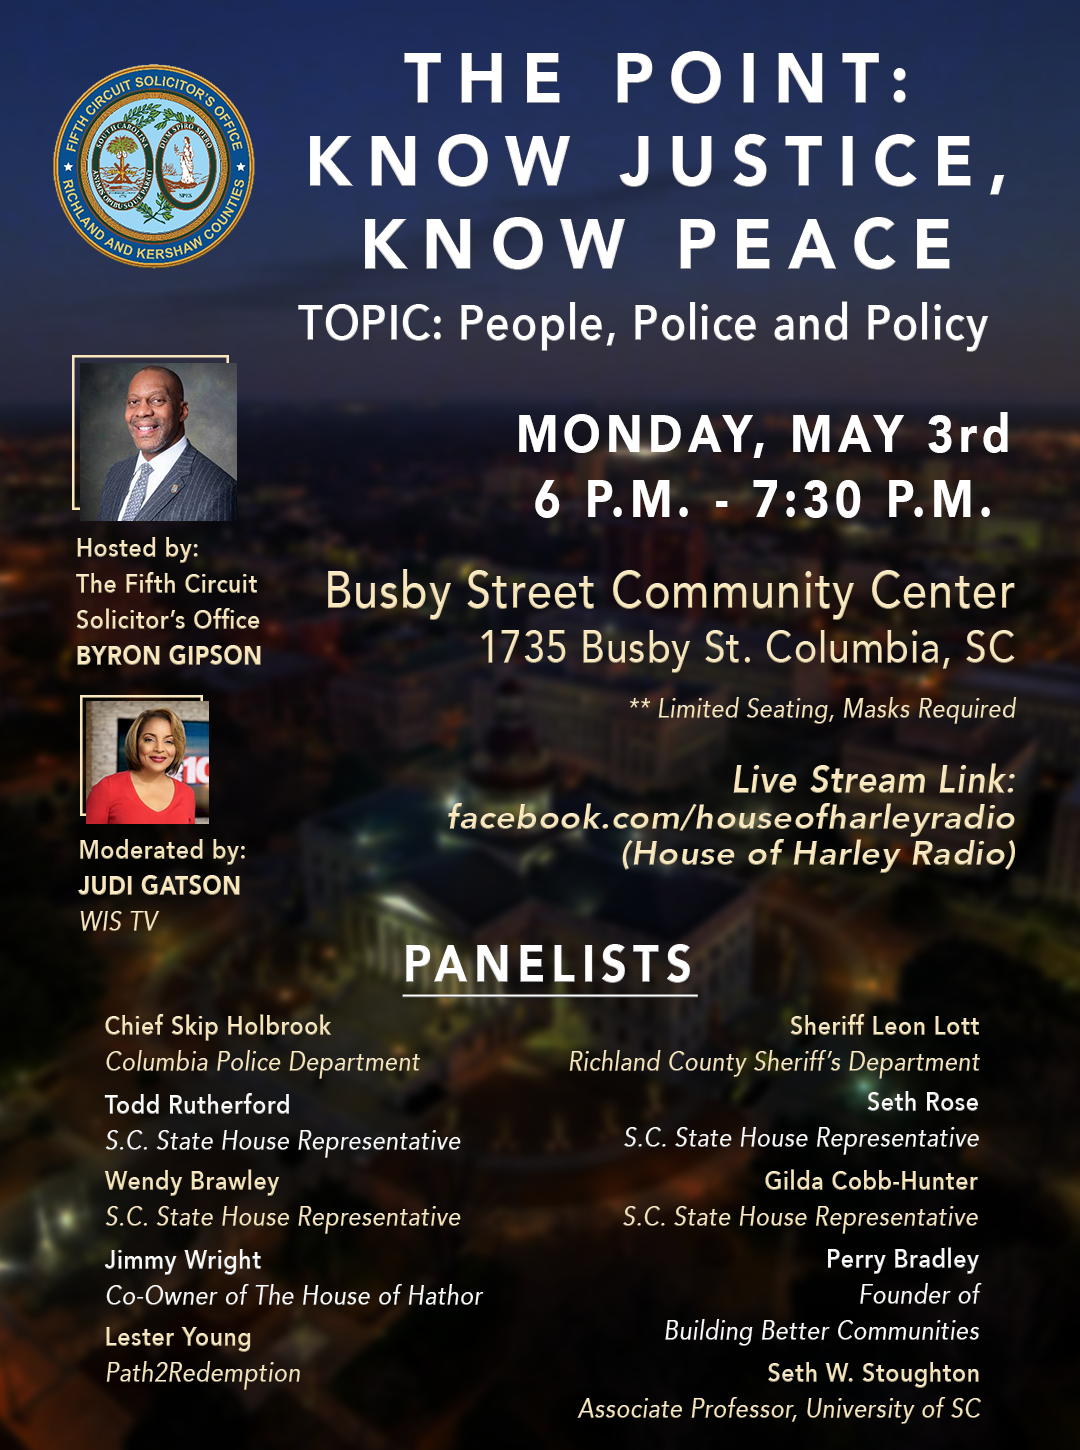 A flier promoting the Know Justice, Know Peace event, hosted May 3rd by Solicitor Byron Gipson